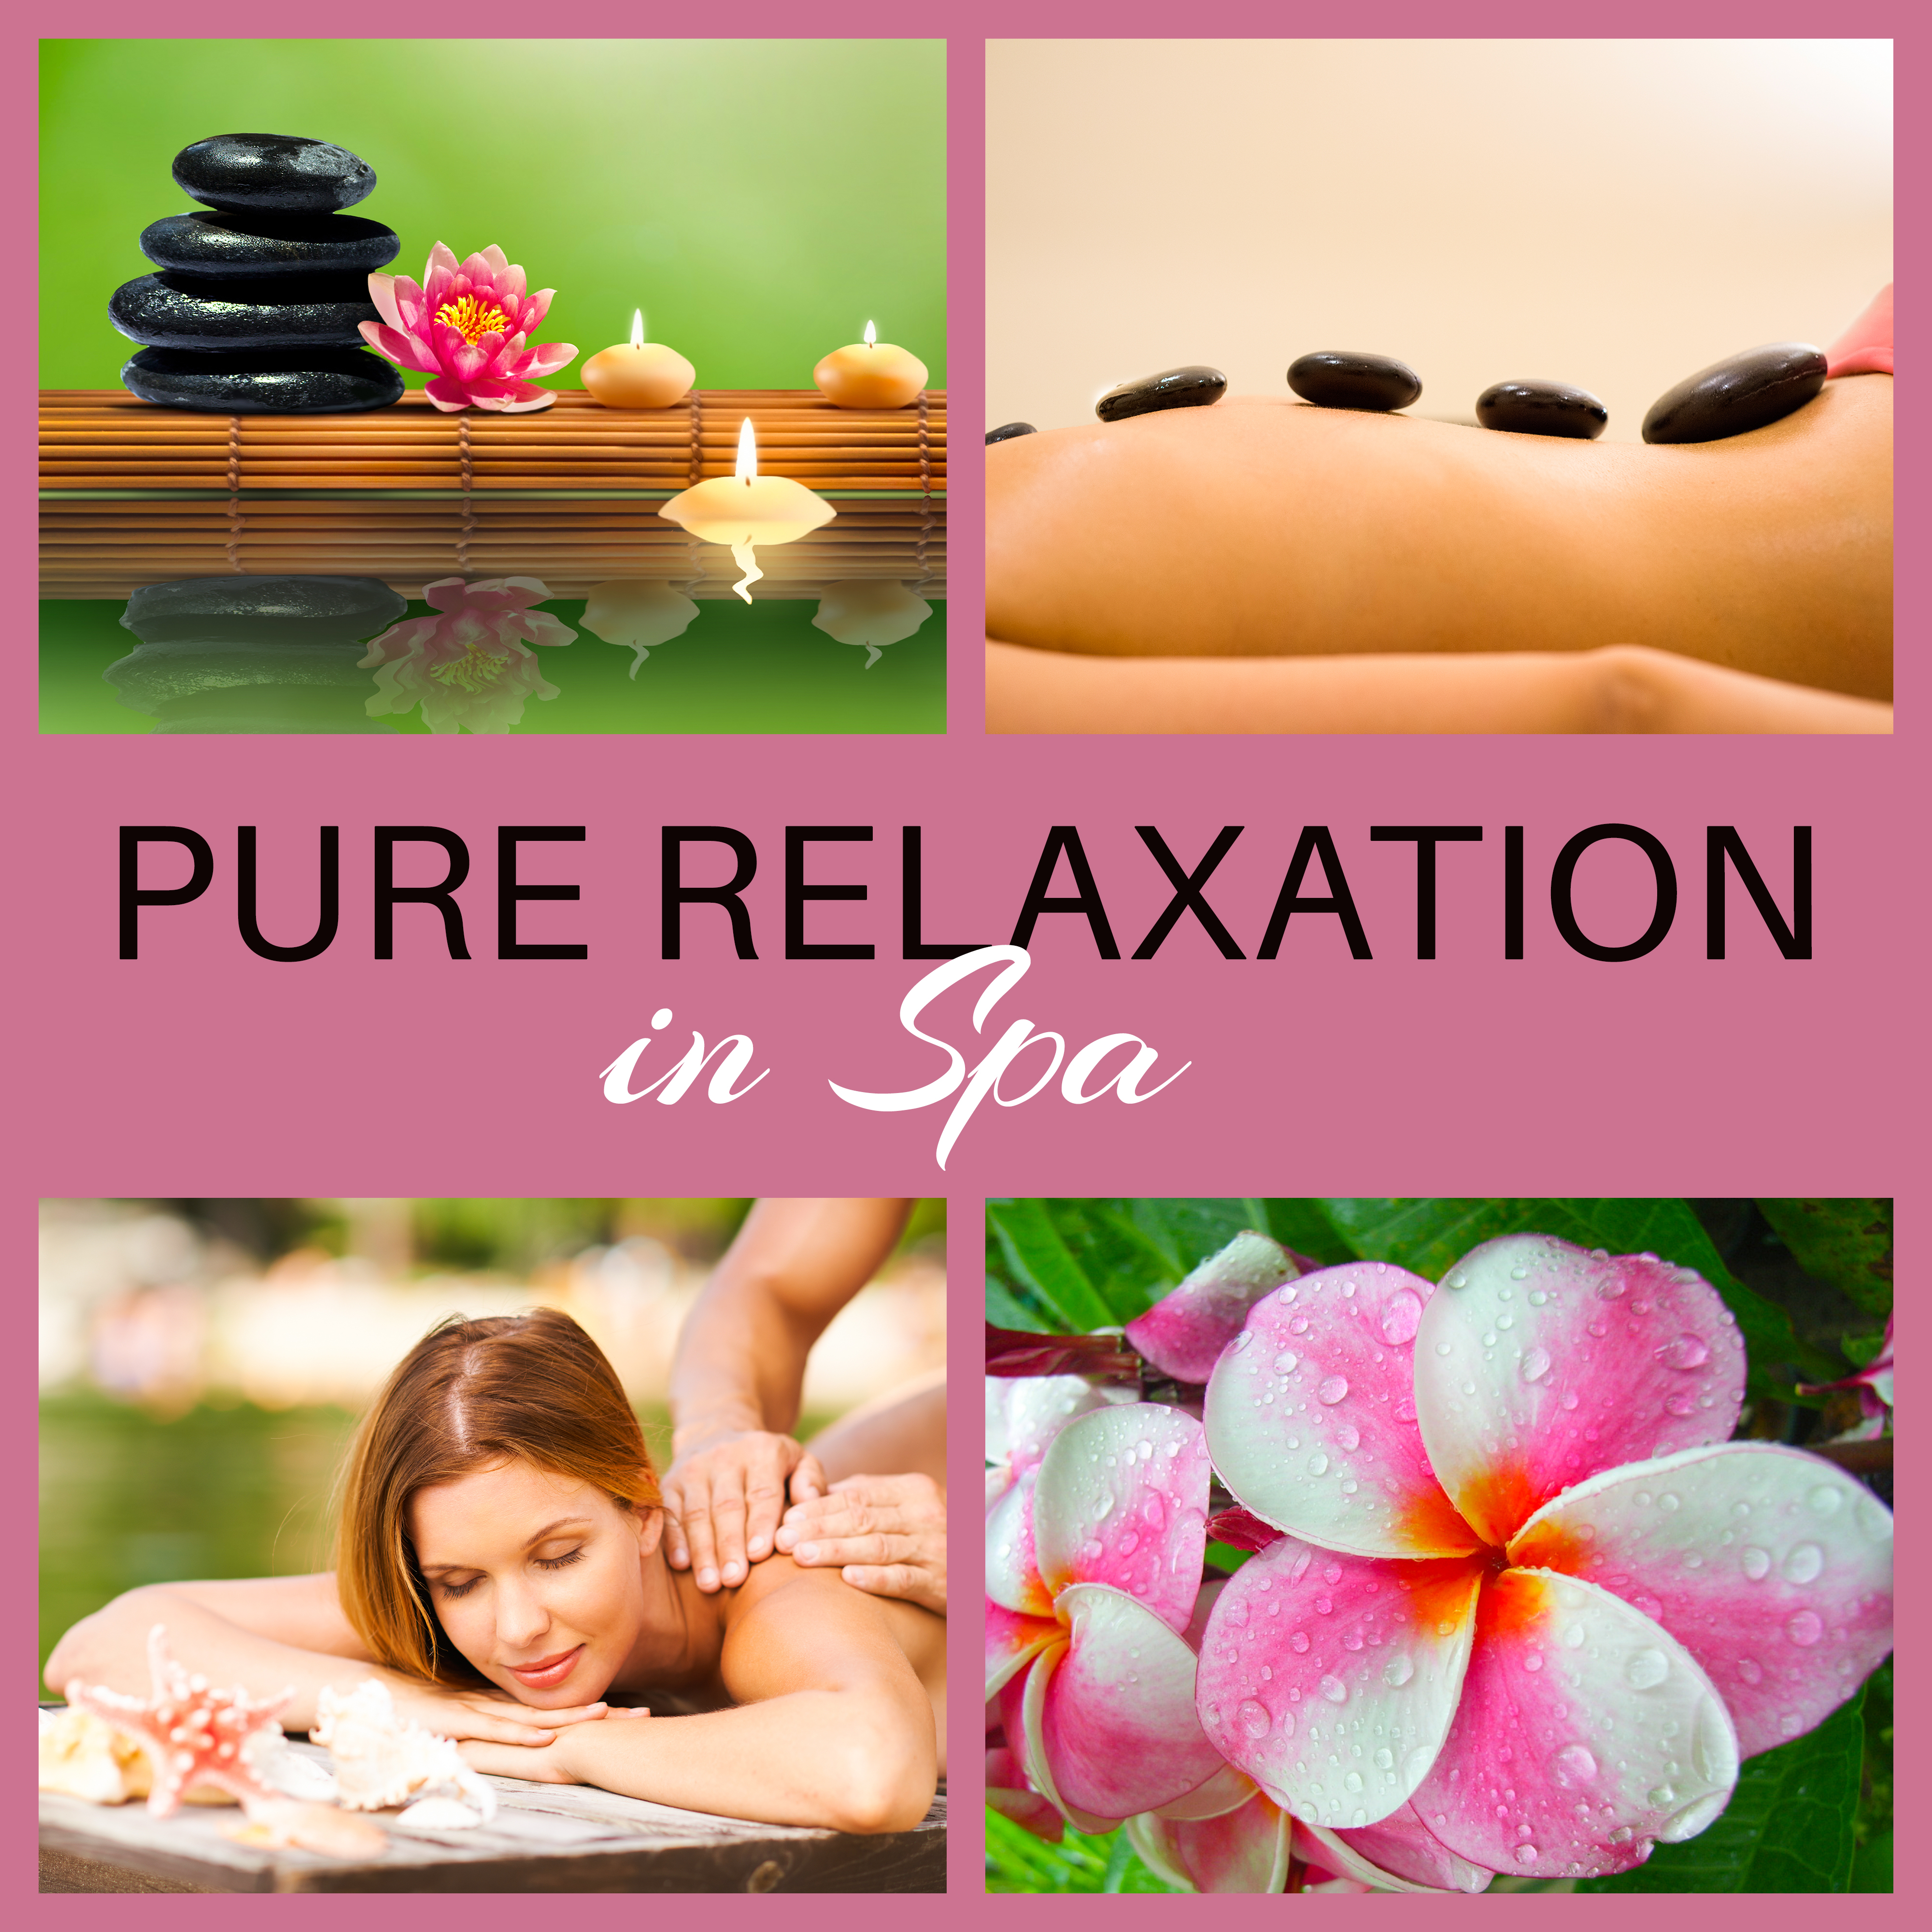 Pure Relaxation in Spa  Massage Music, Wellness, Stress Relief, Healing Music, Soft Nature Sounds to Calm Down, Soothing Spa